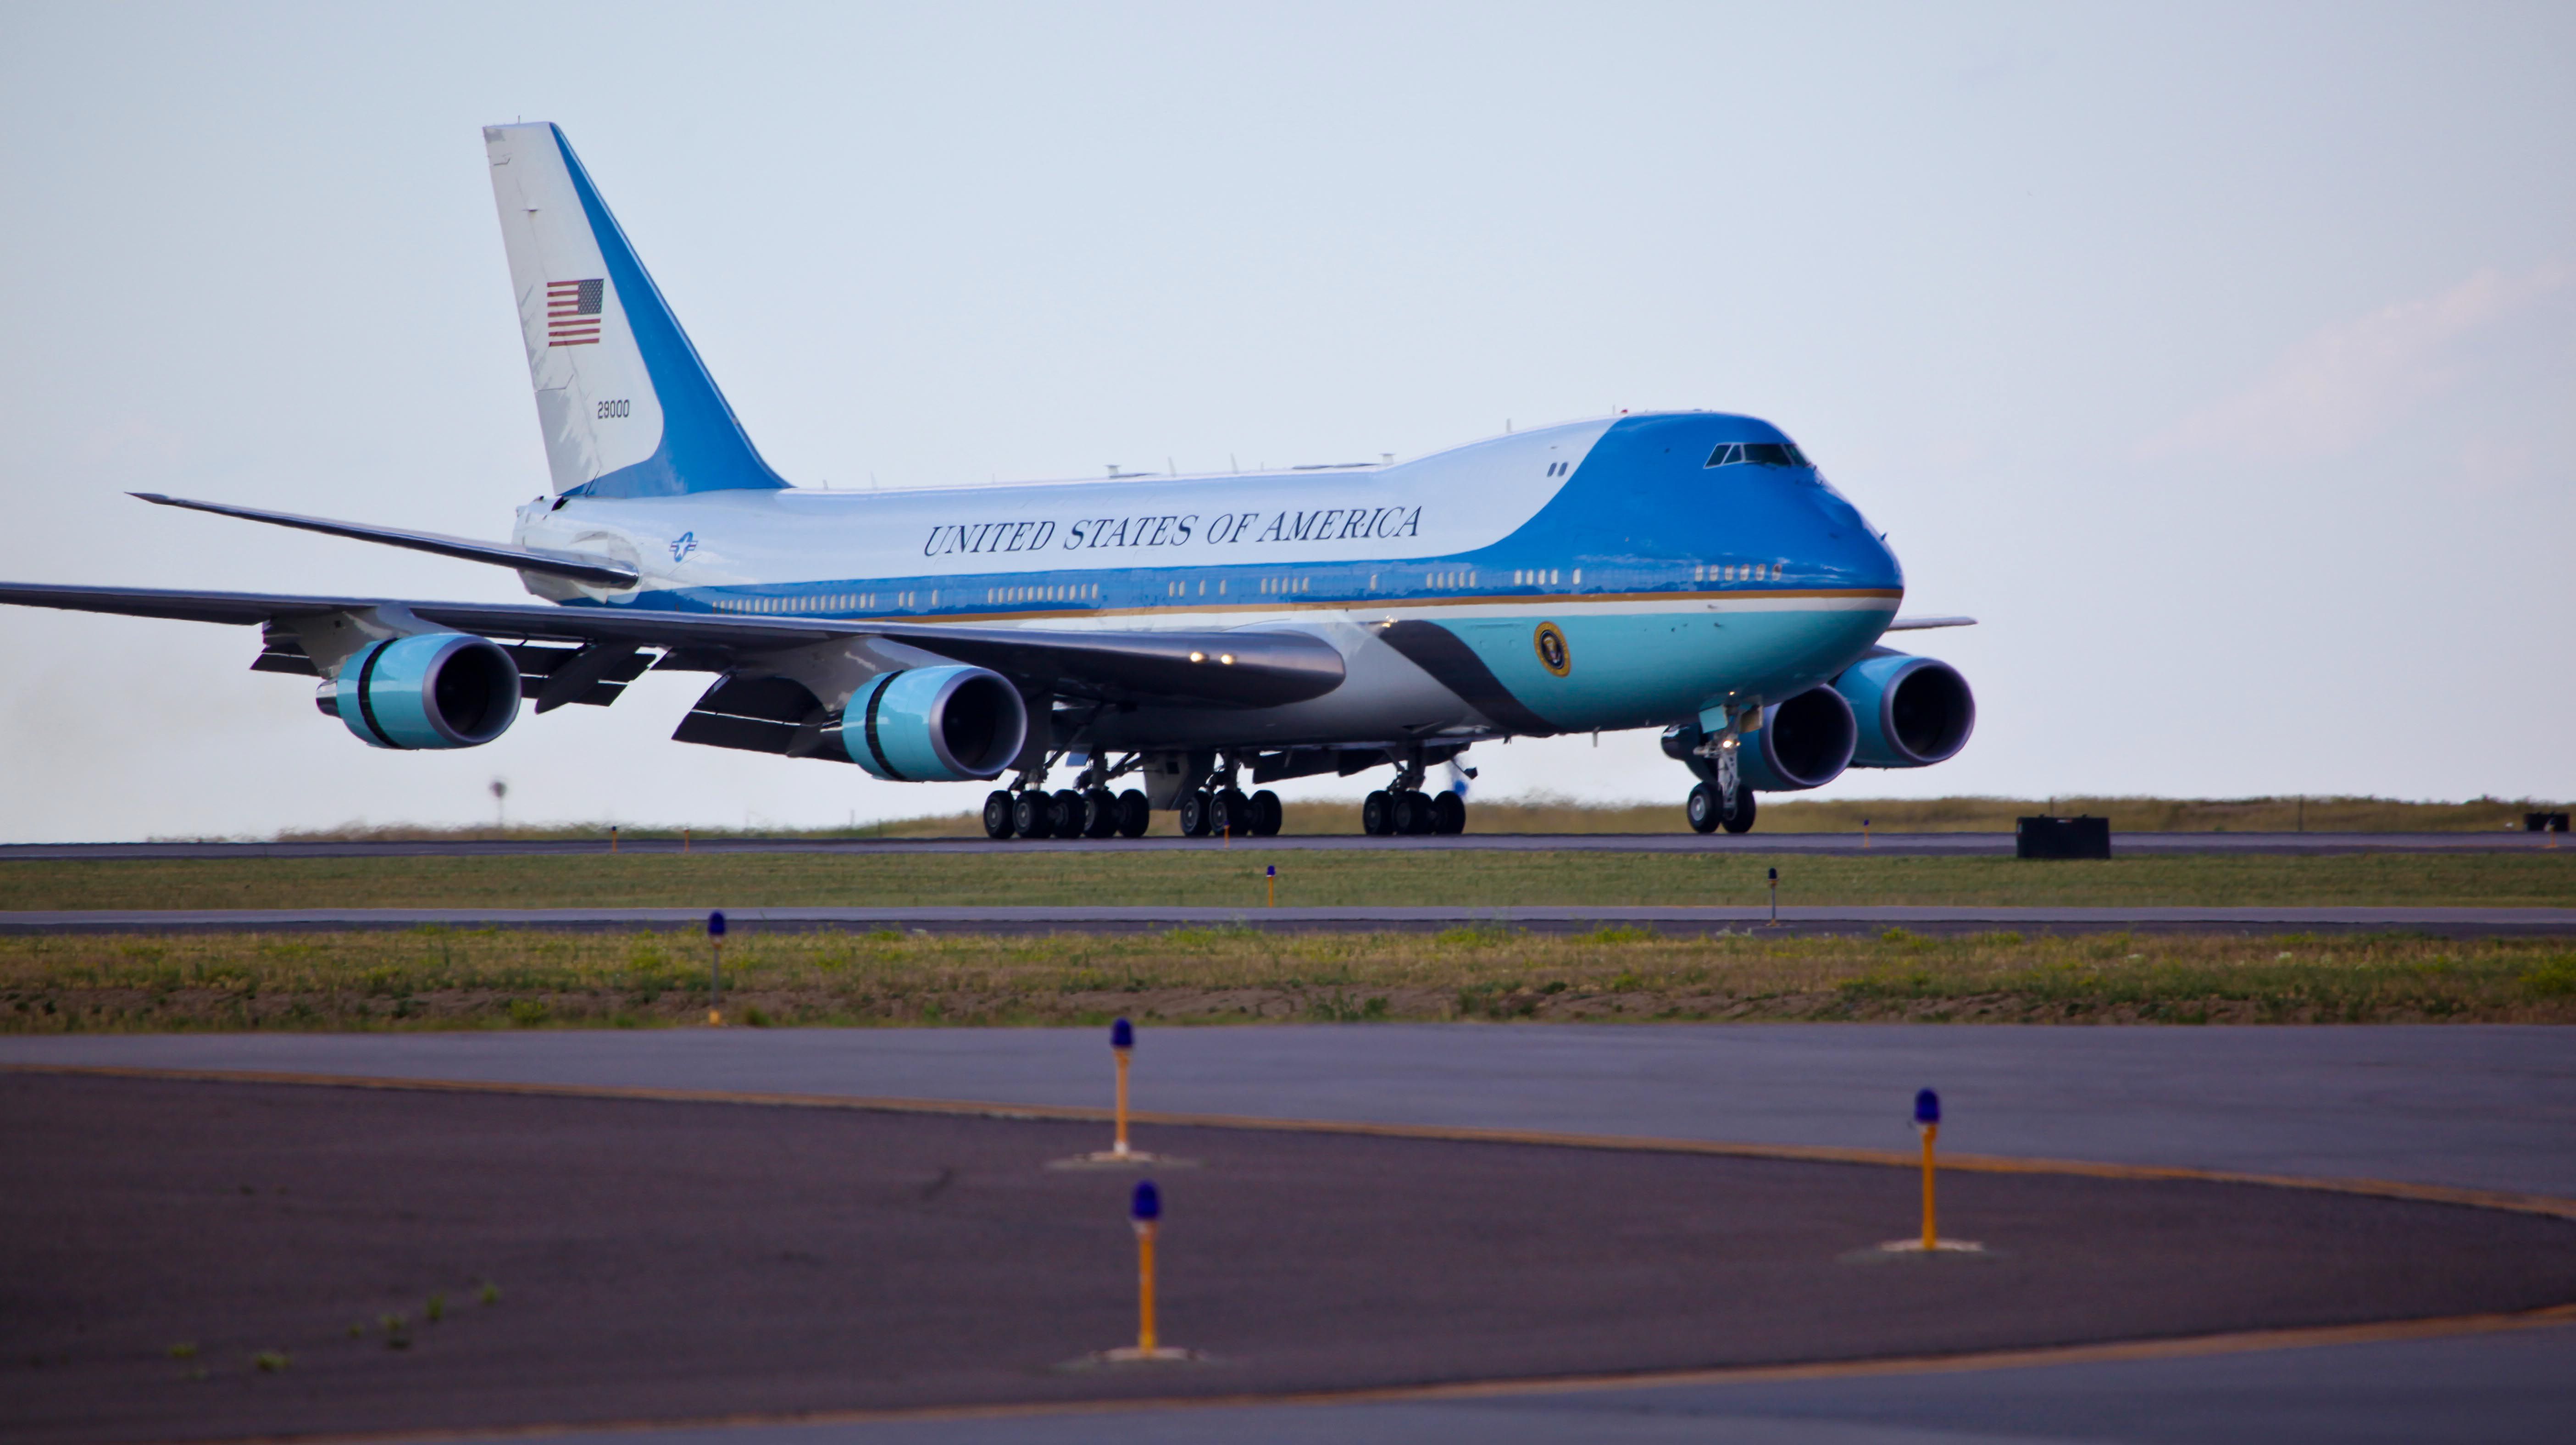 The Air Force One Boeing 747 taxiing to the runway.